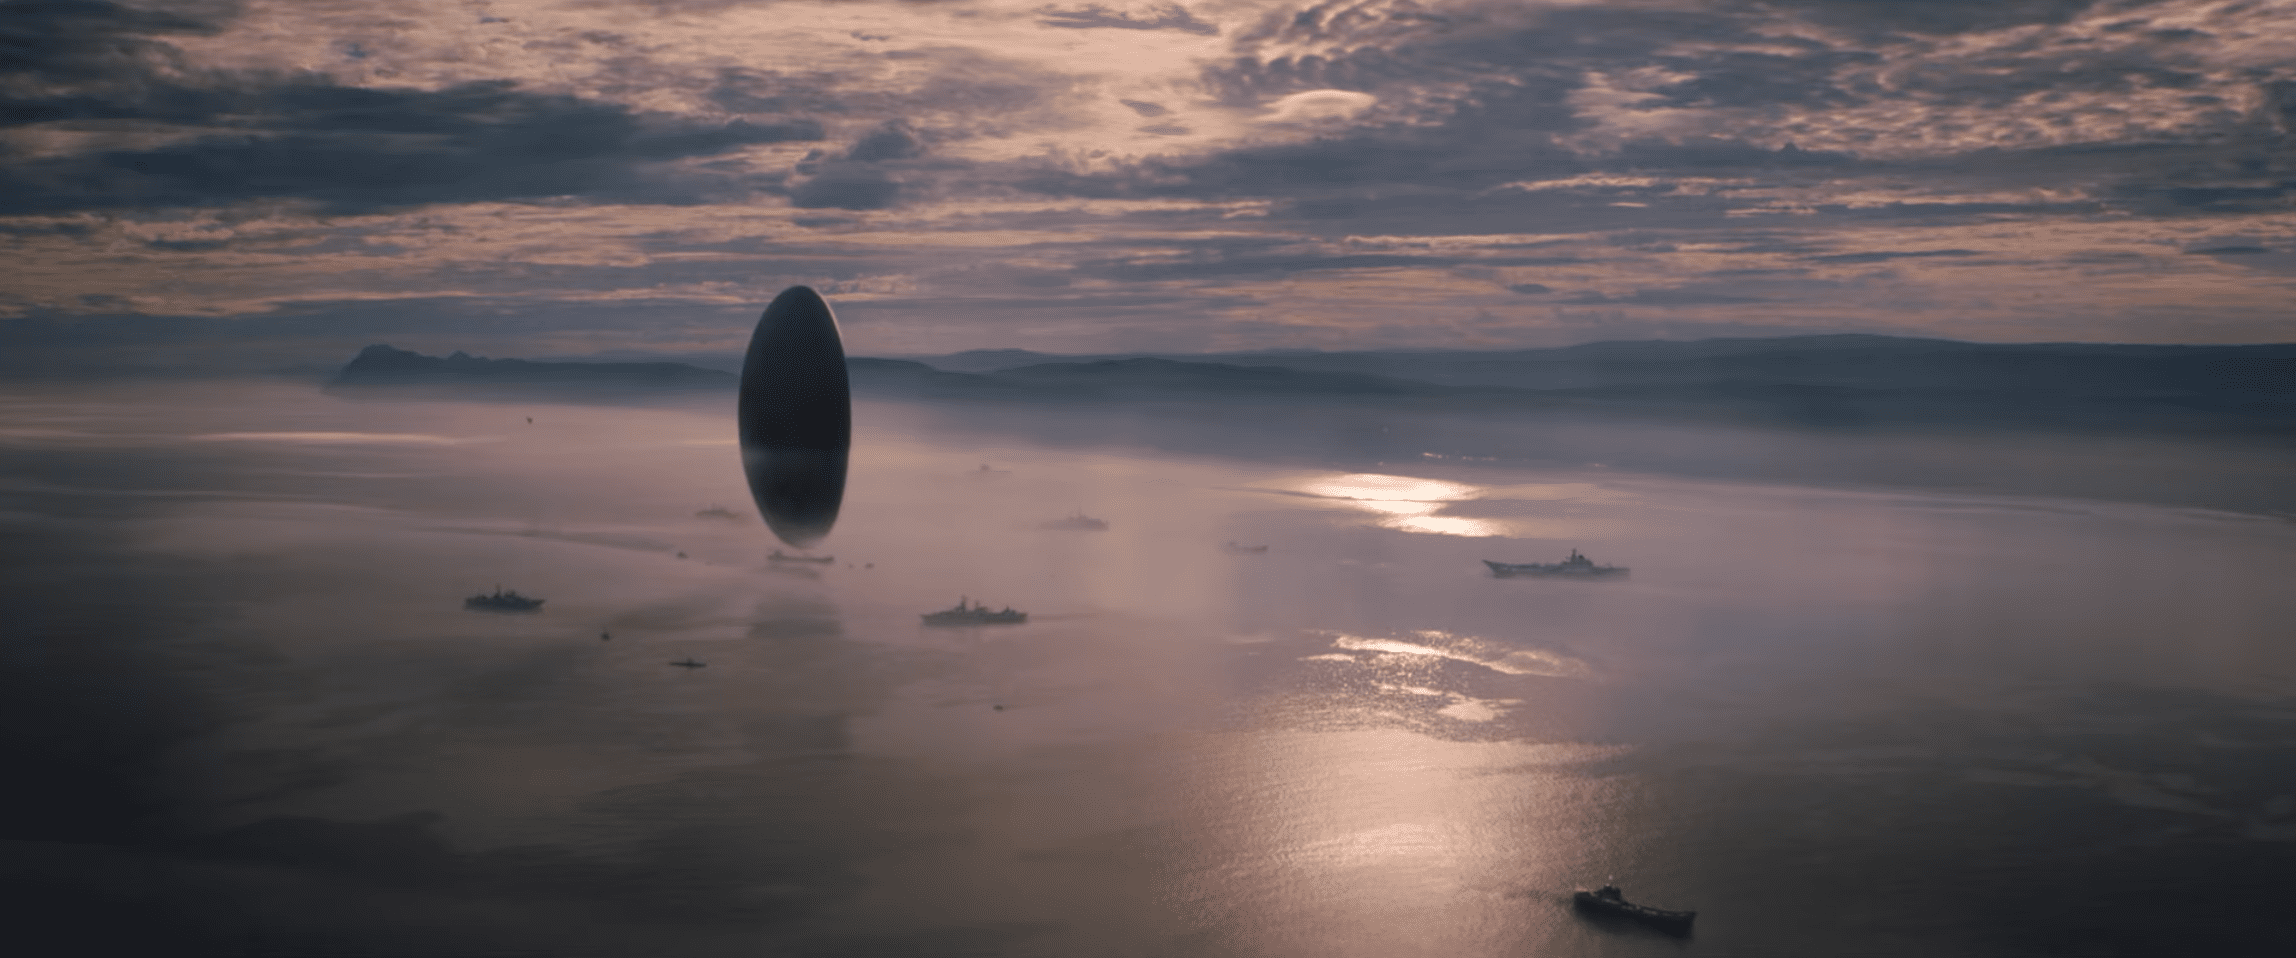 Arrival (2016) Review and Ending Explained